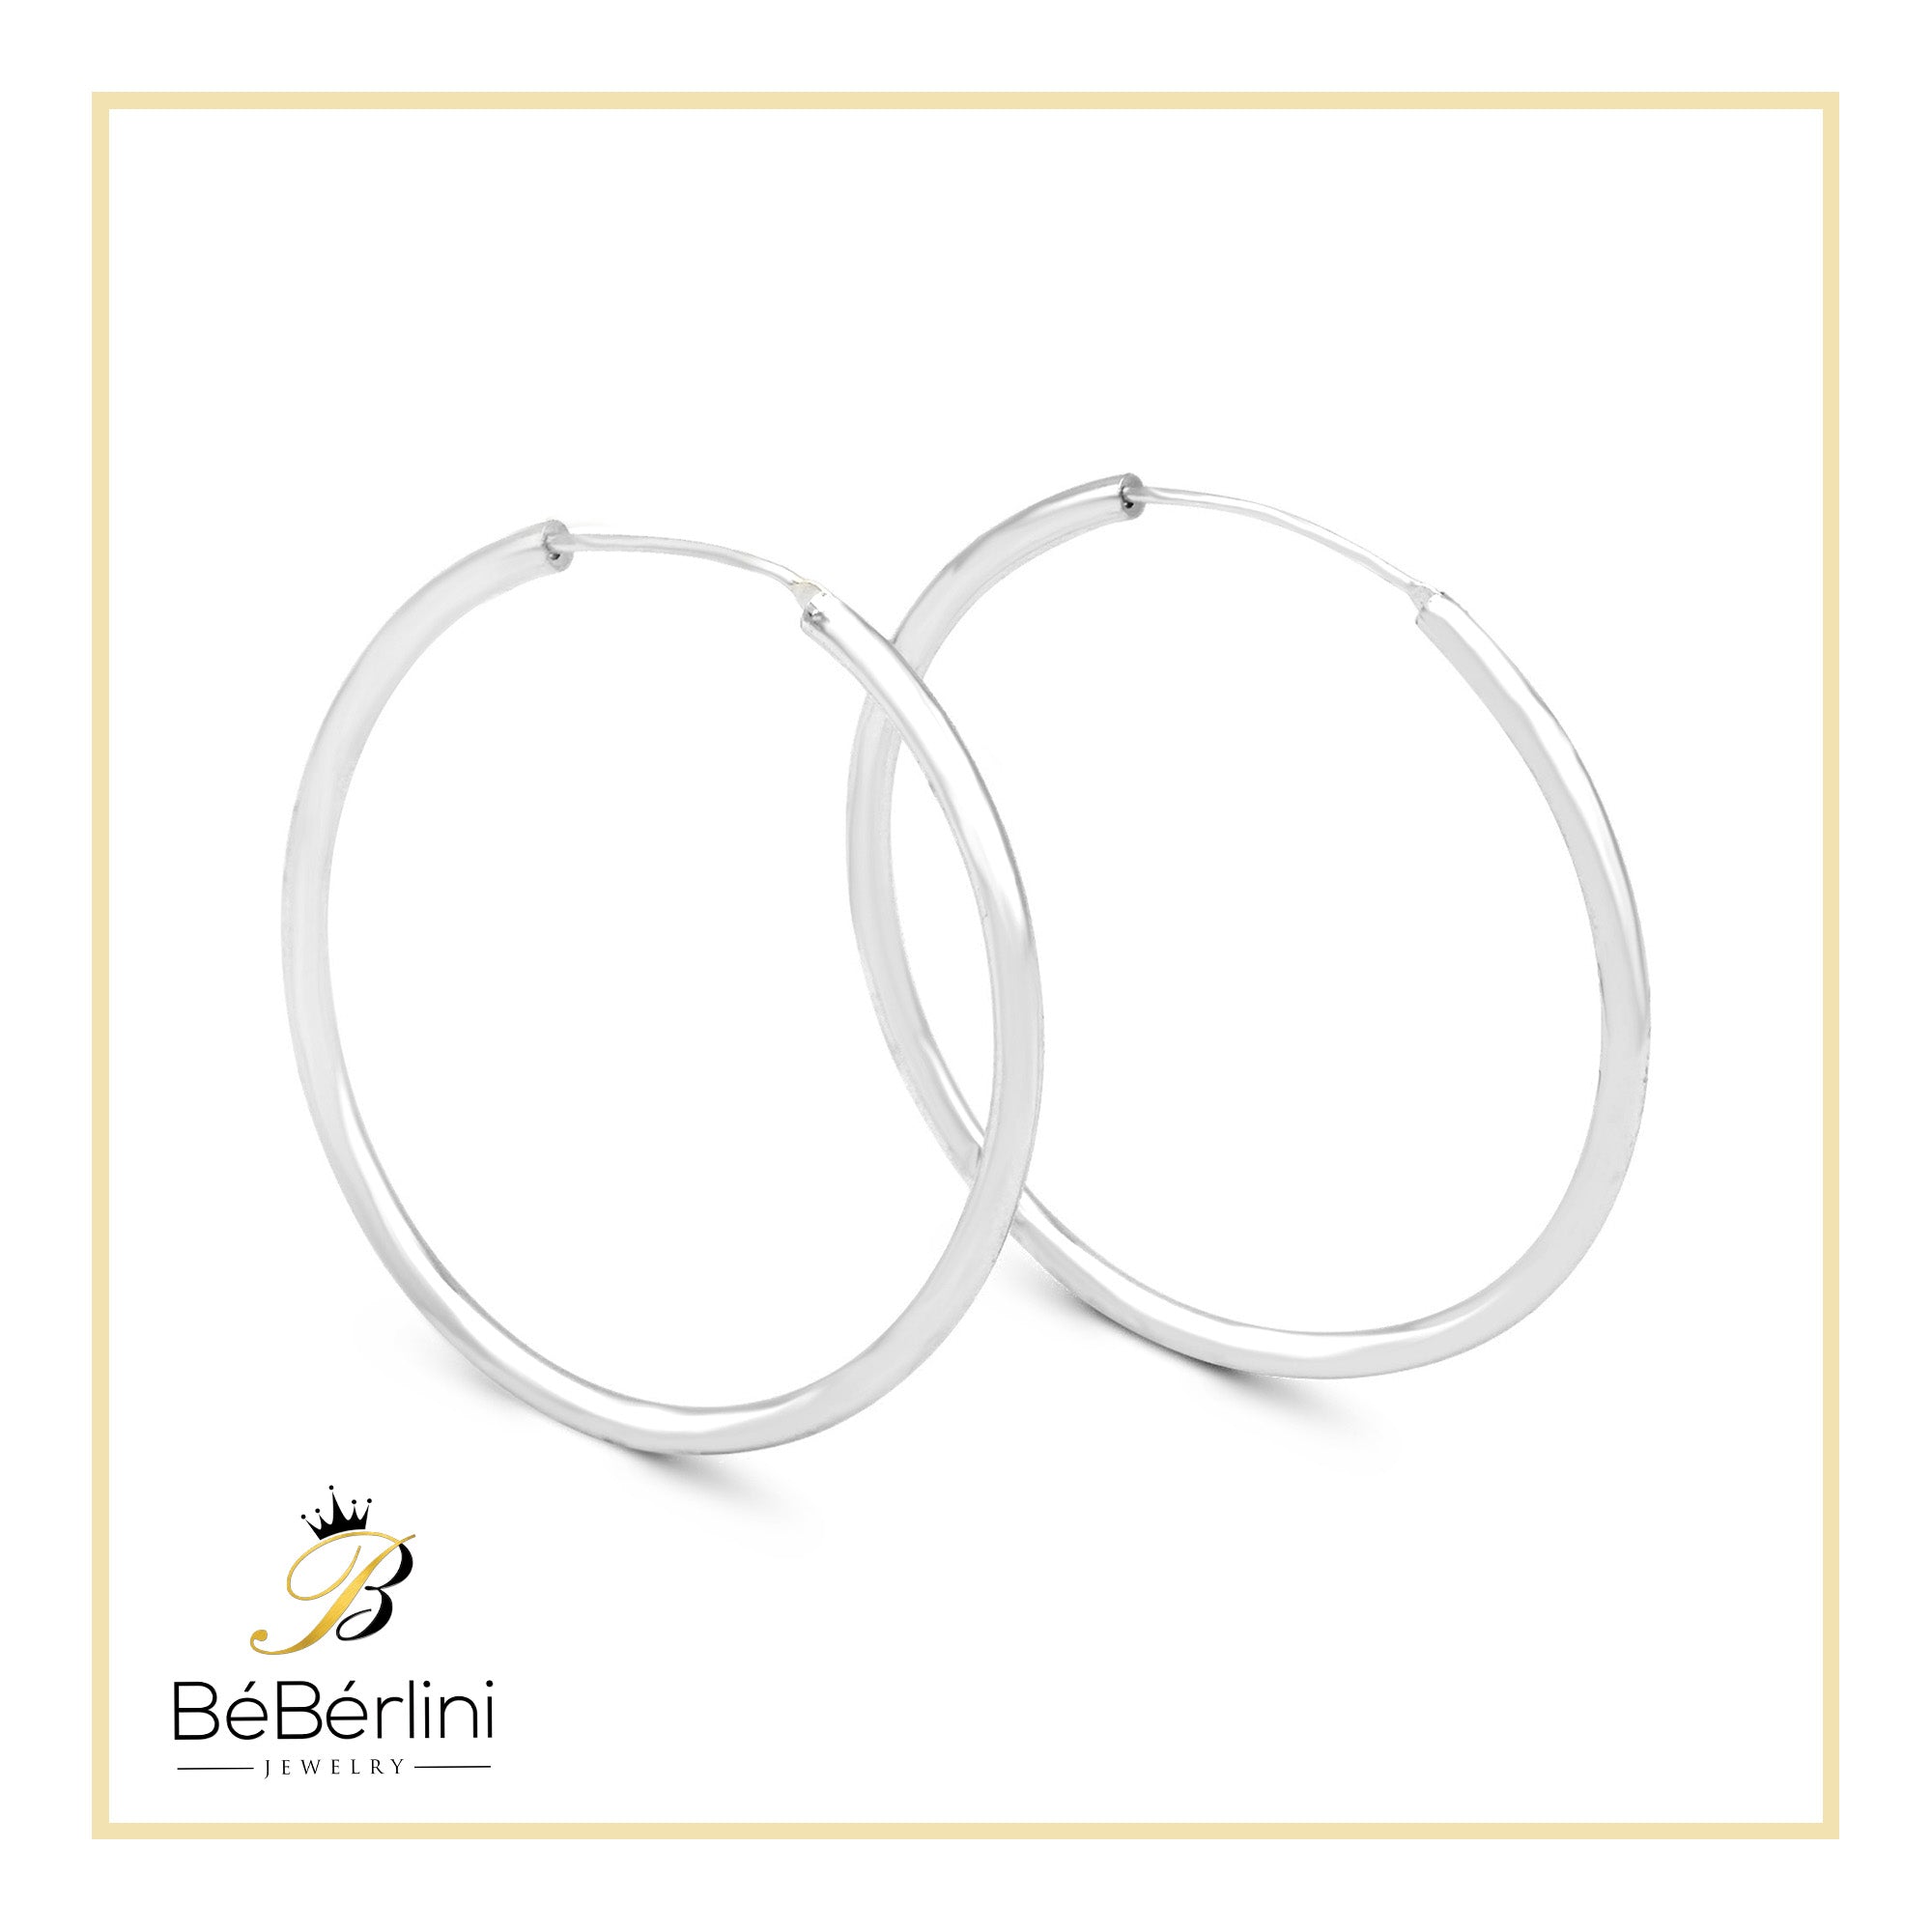 Round Hoops Features